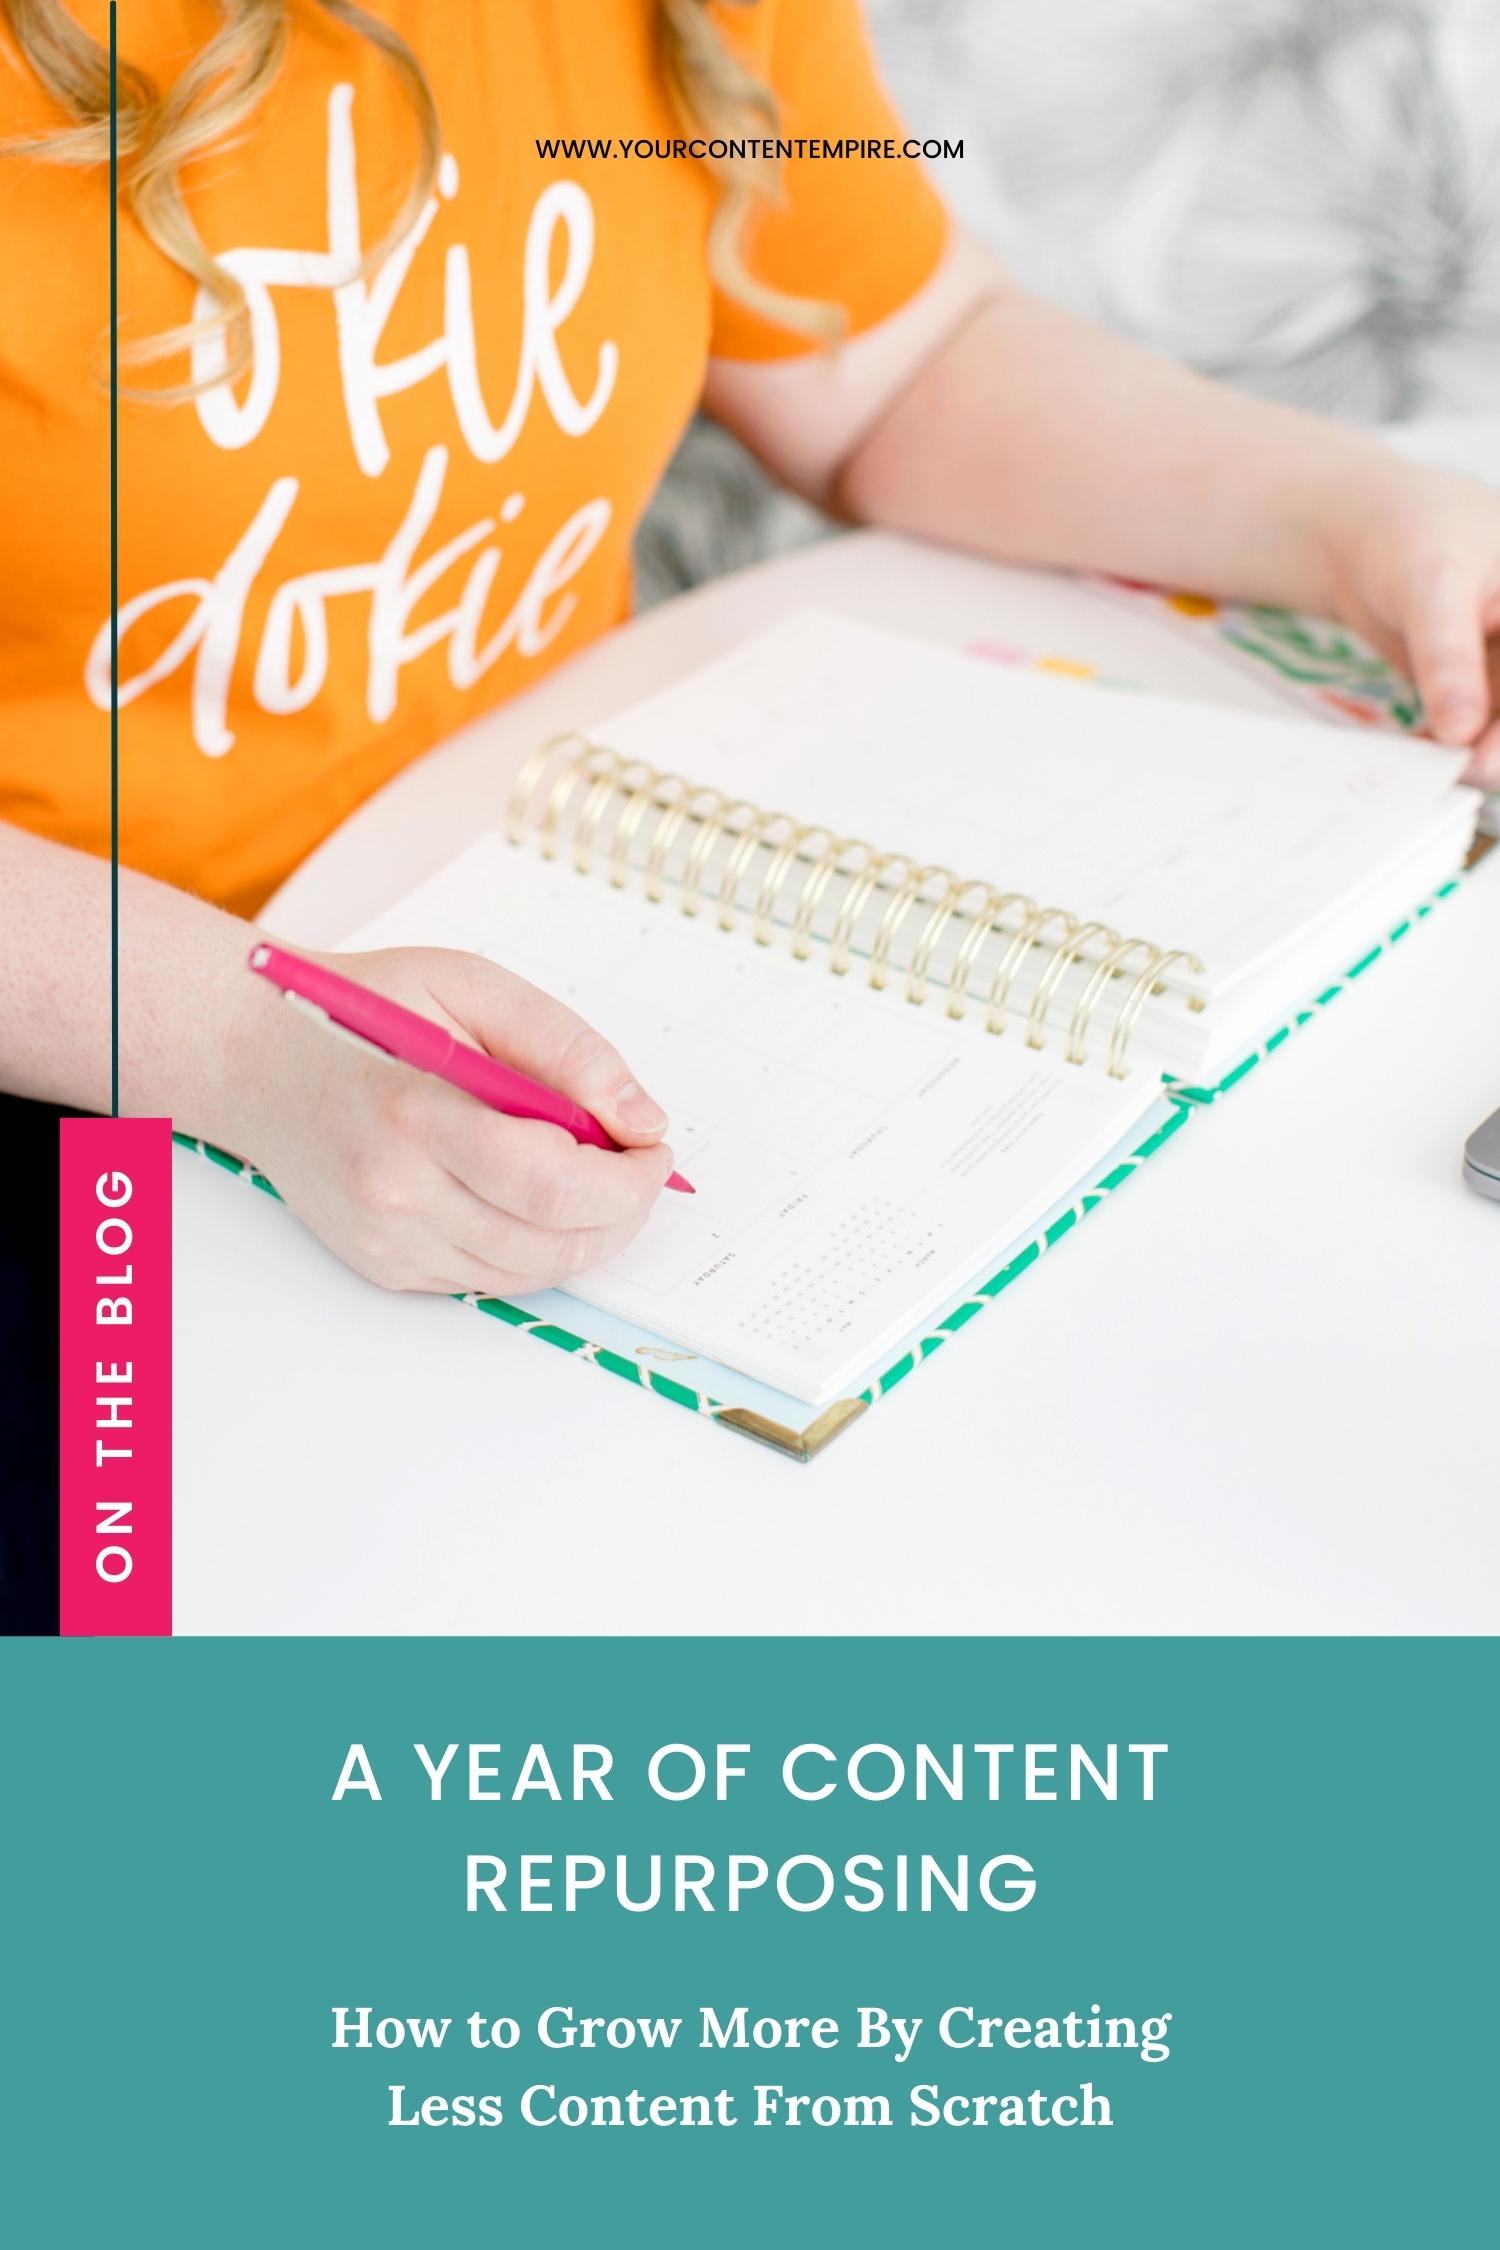 A Year of Content Repurposing: How to Grow More By Creating Less Content From Scratch